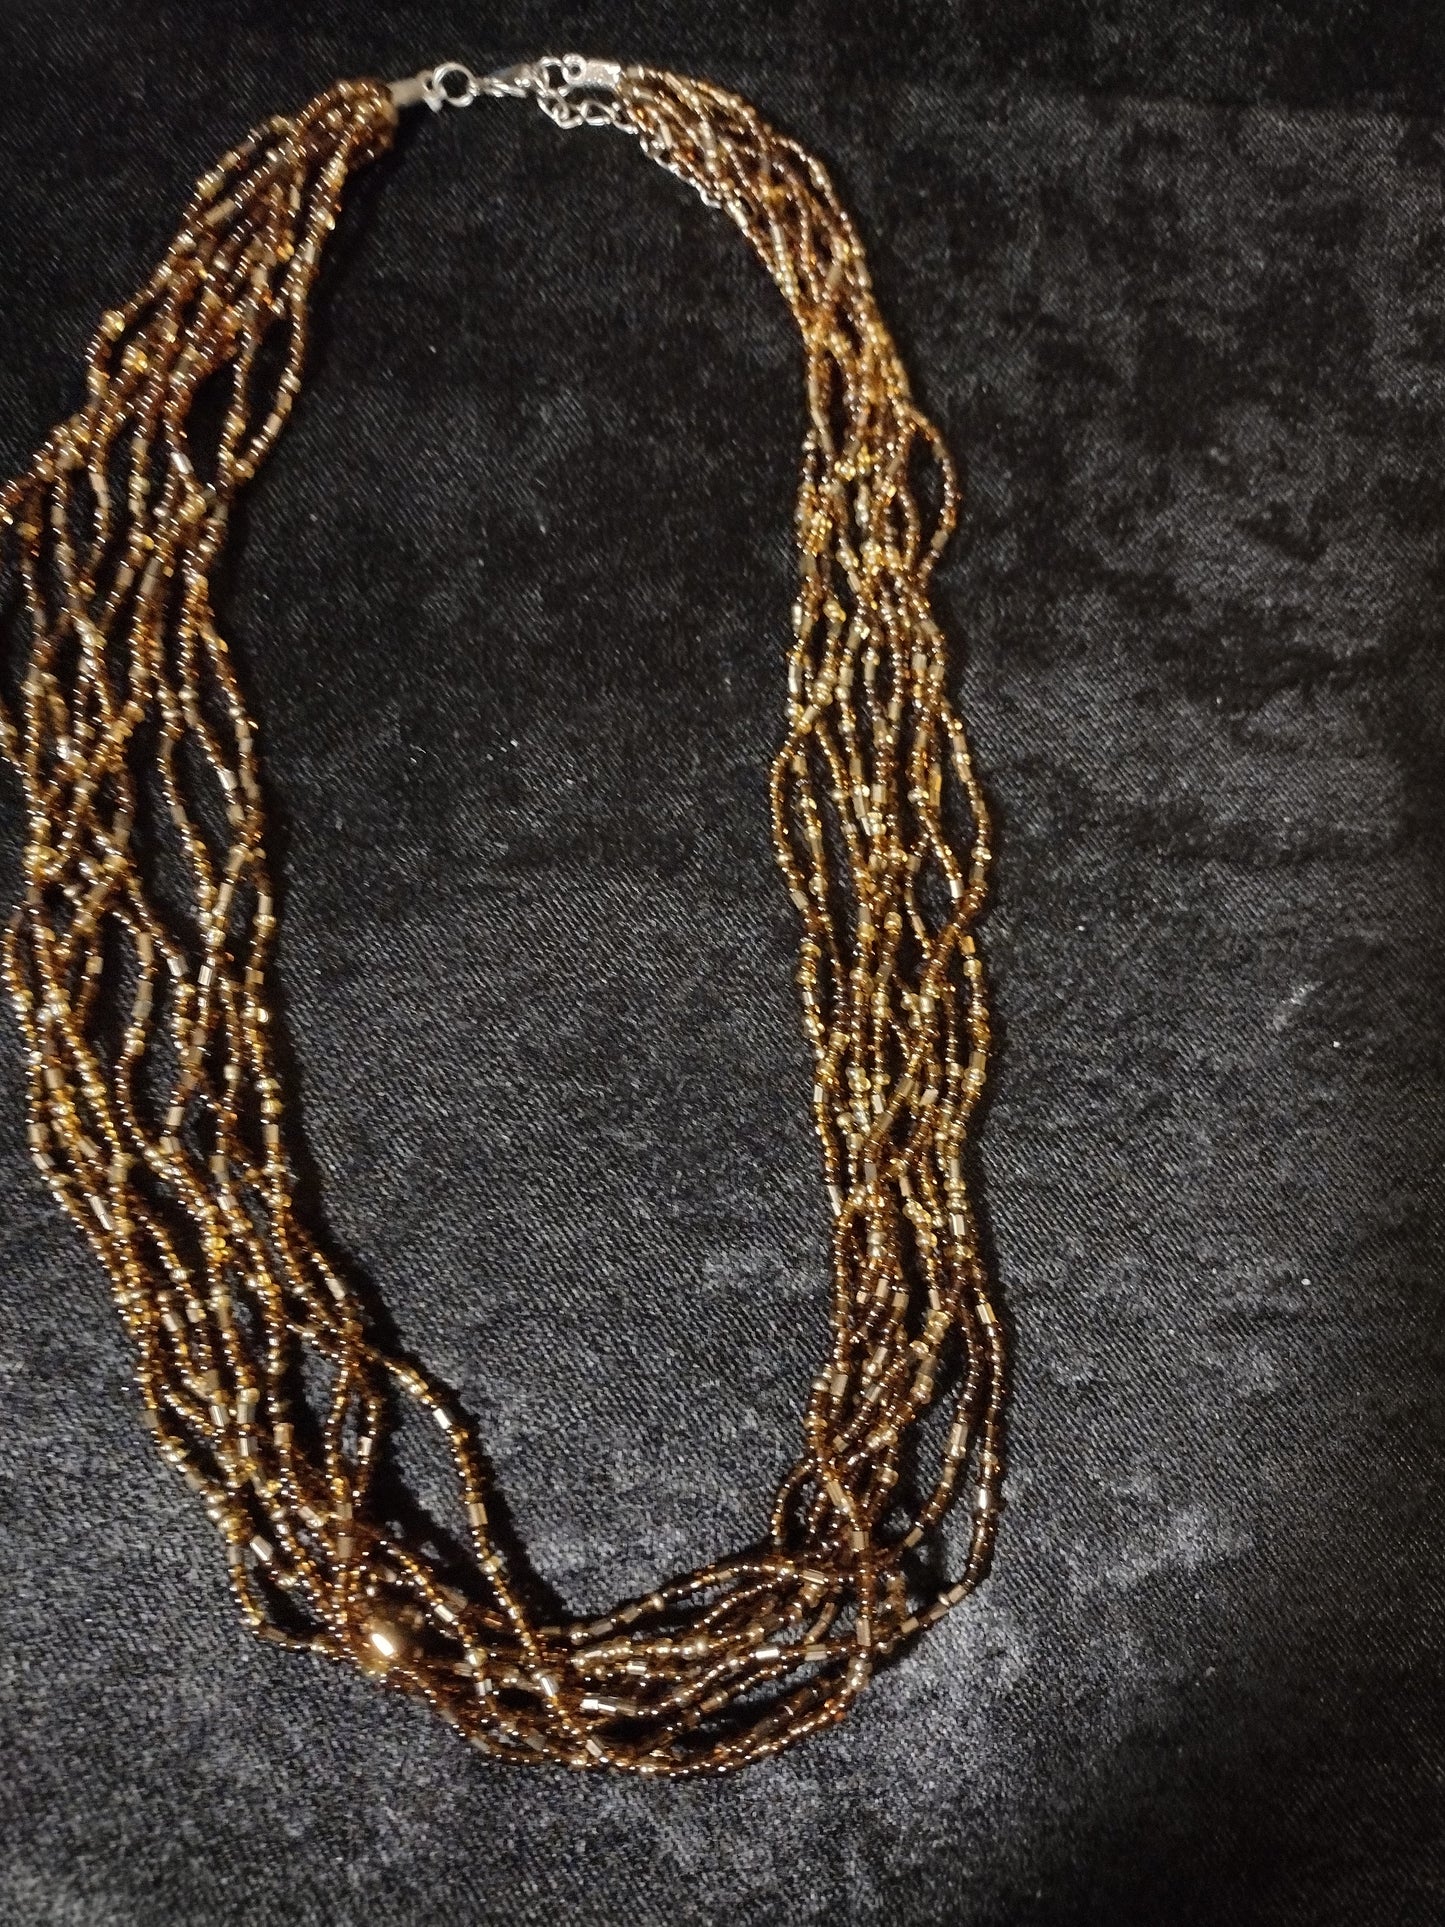 Women 8 layered brown beaded necklace